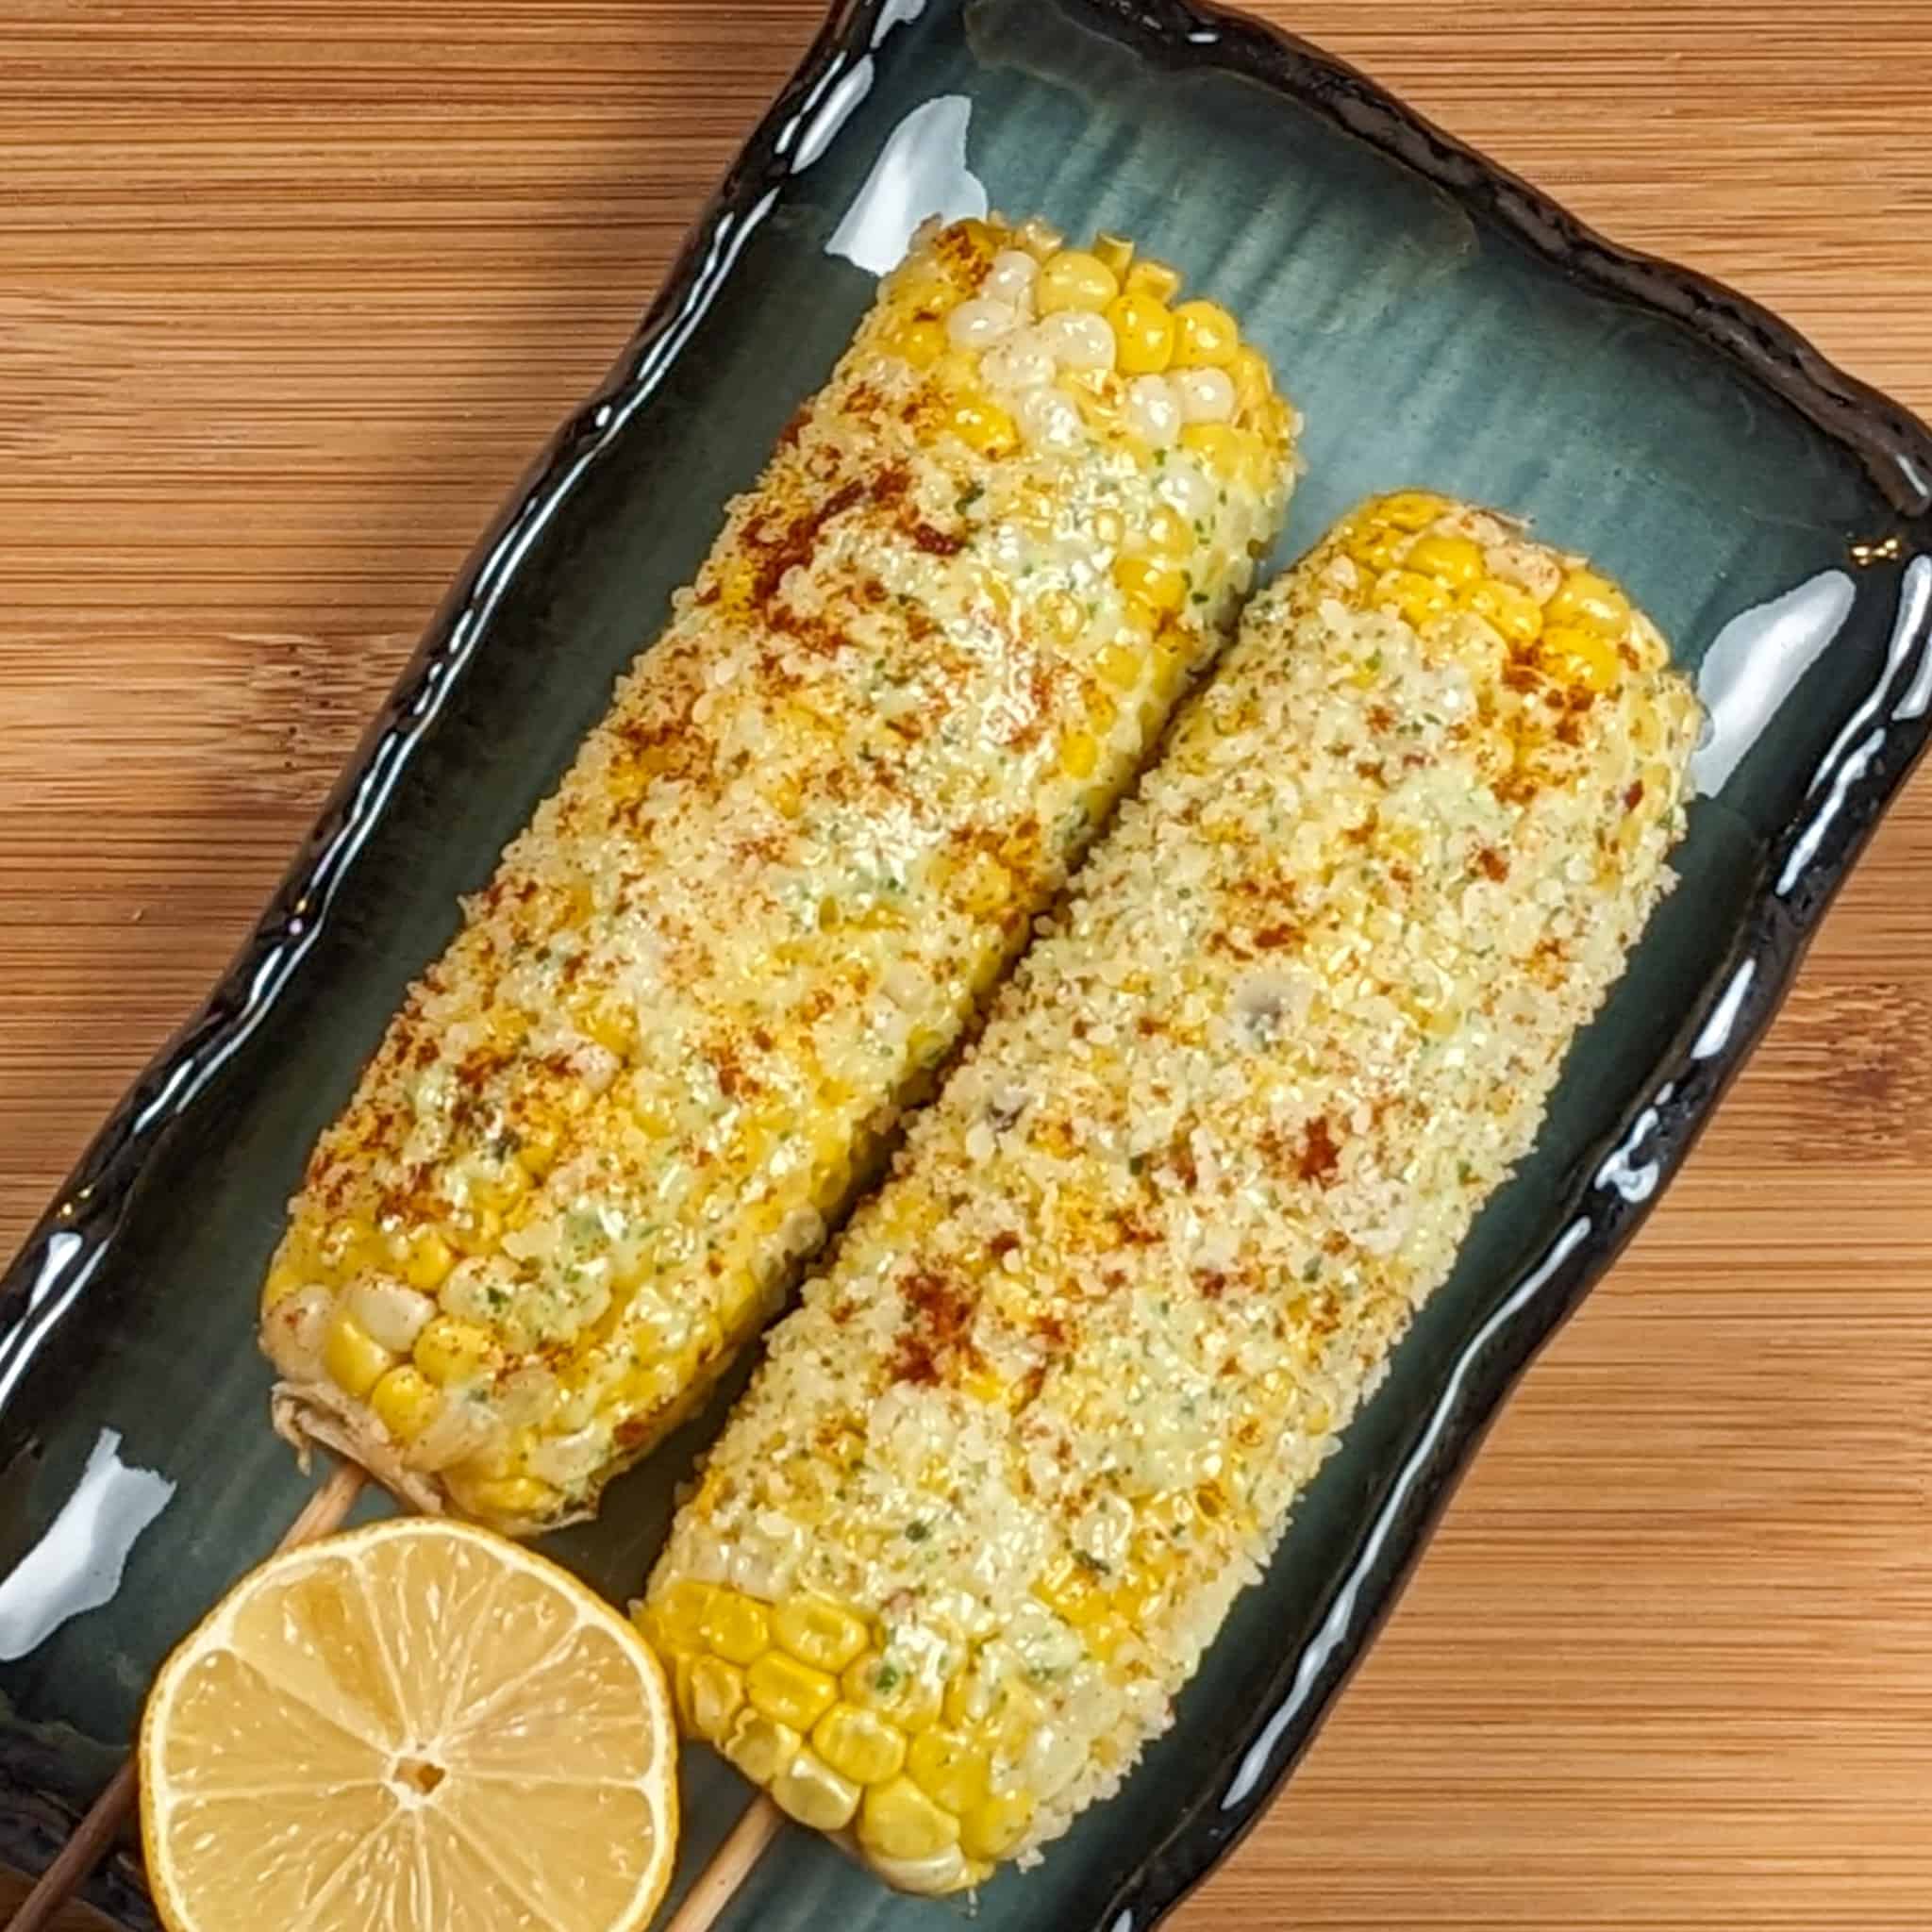 oven-baked parmesan pesto corn on the cob on a rectangular plate with half of a lemon on a wooden background